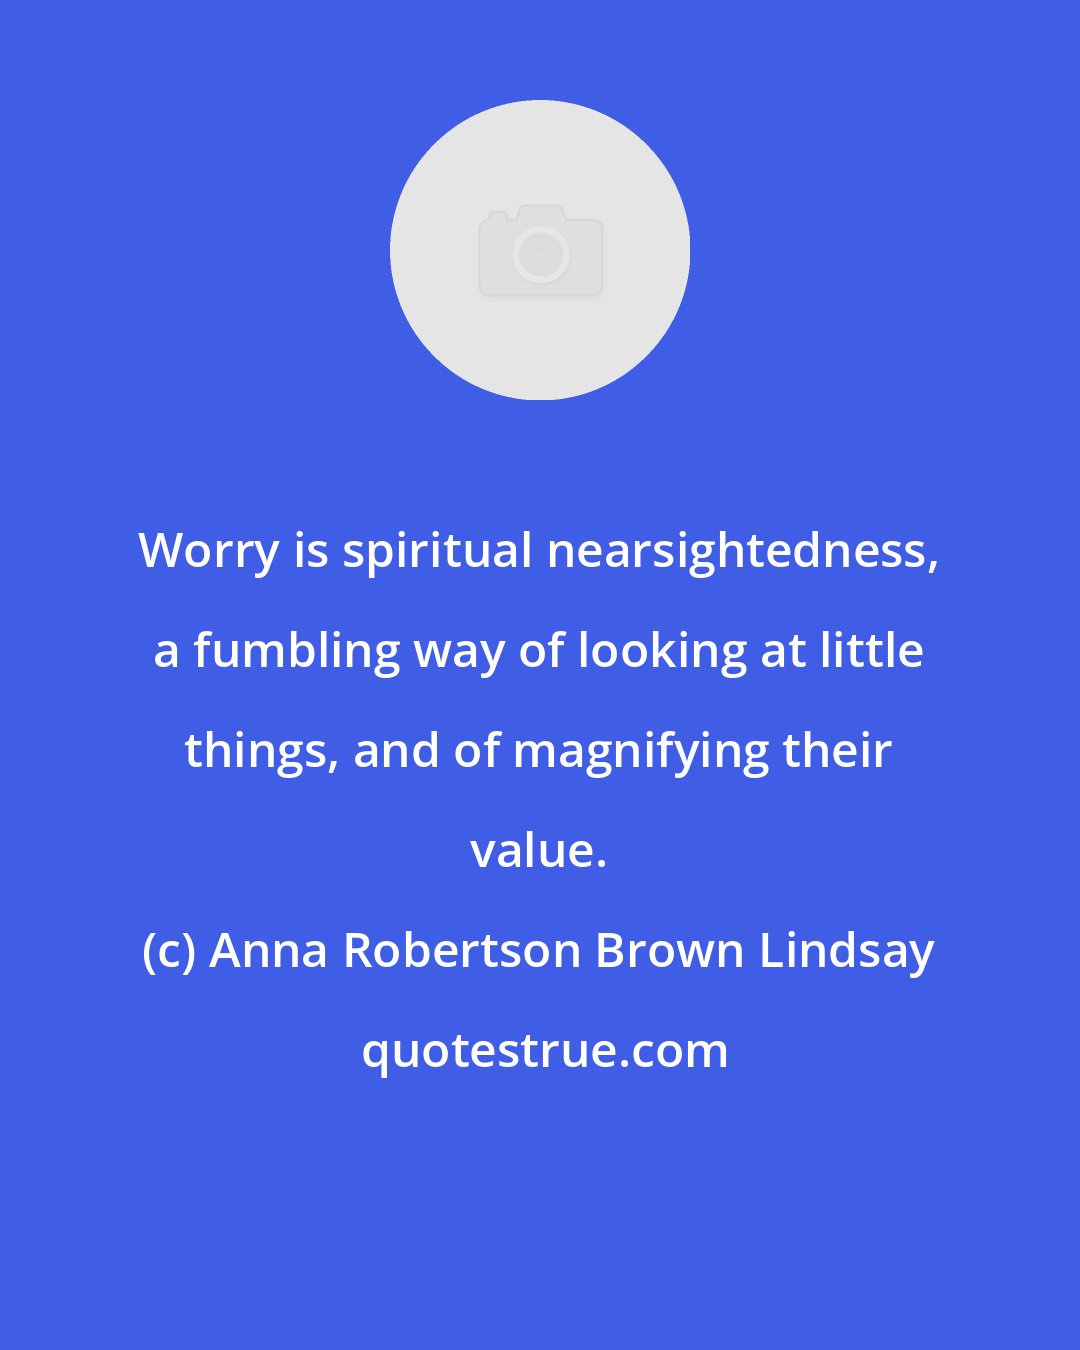 Anna Robertson Brown Lindsay: Worry is spiritual nearsightedness, a fumbling way of looking at little things, and of magnifying their value.